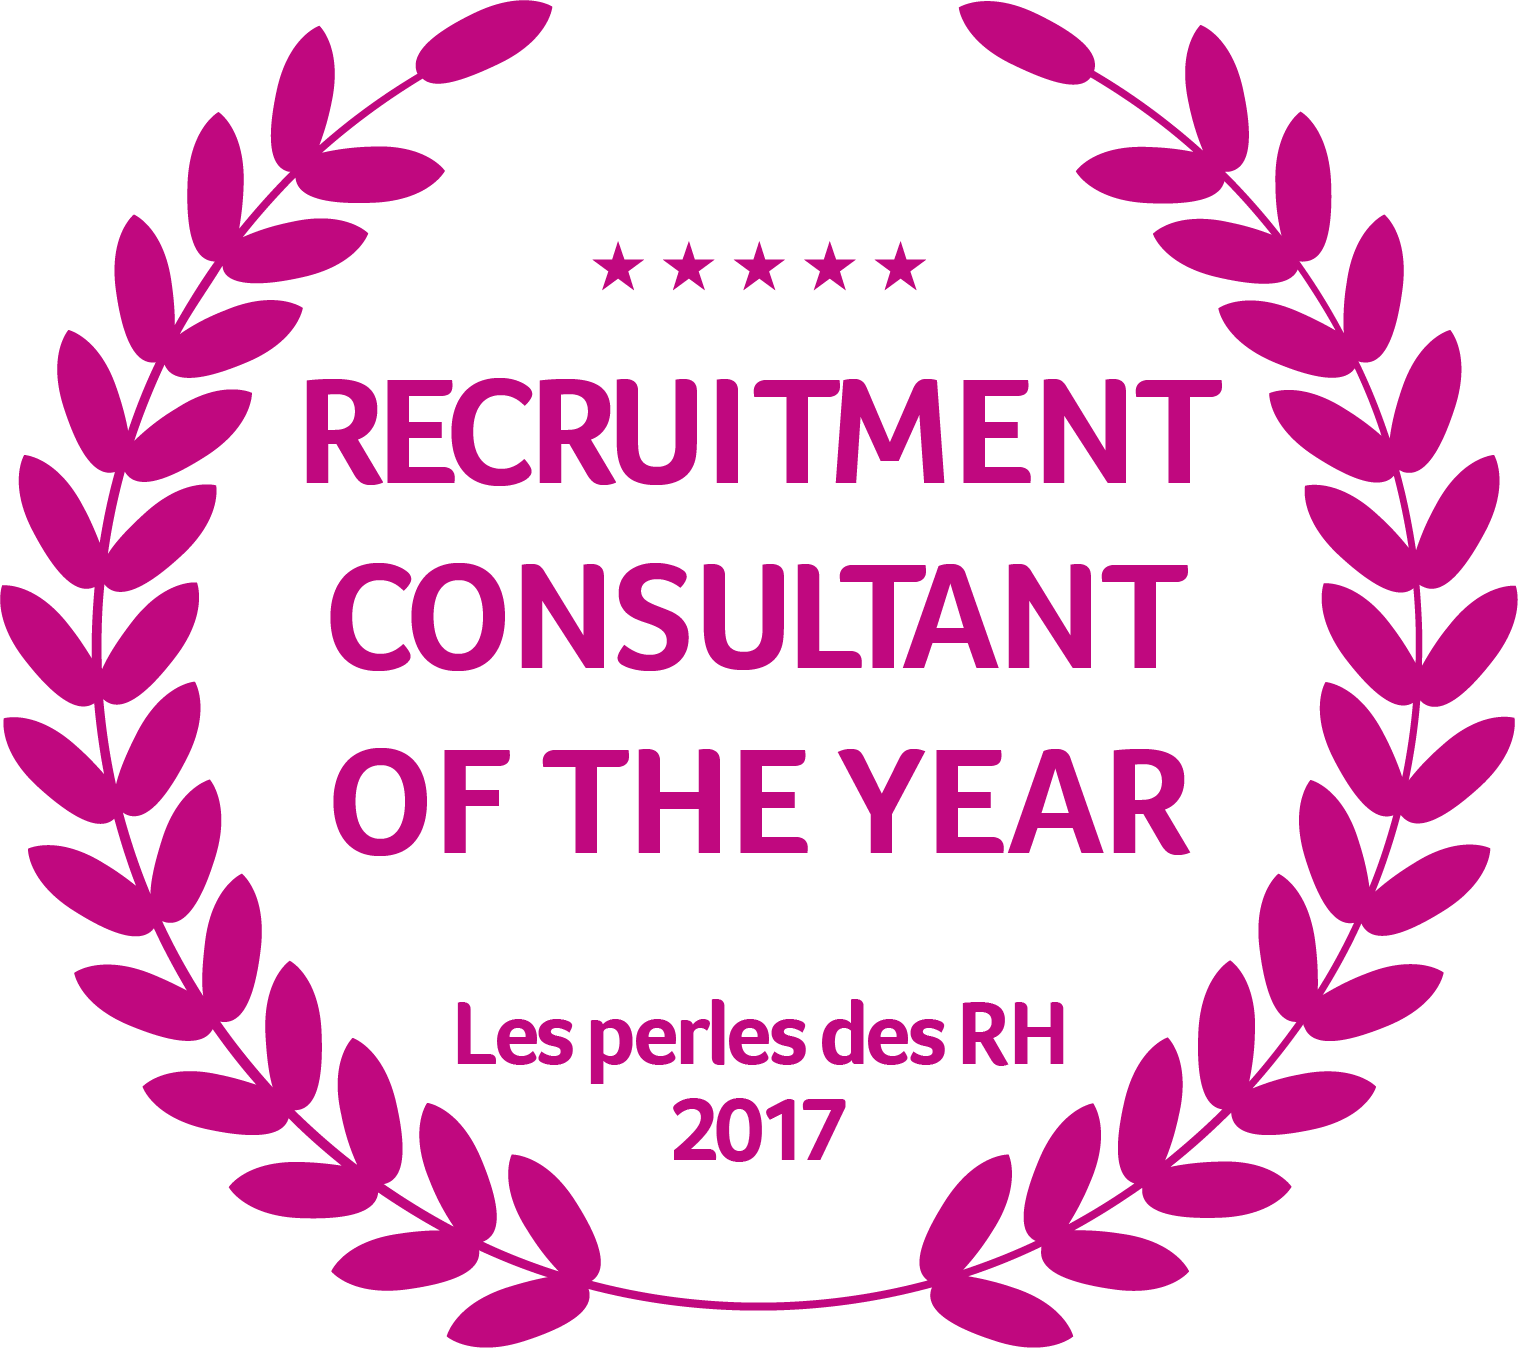 RECRUITMENT CONSULTANT of the Year